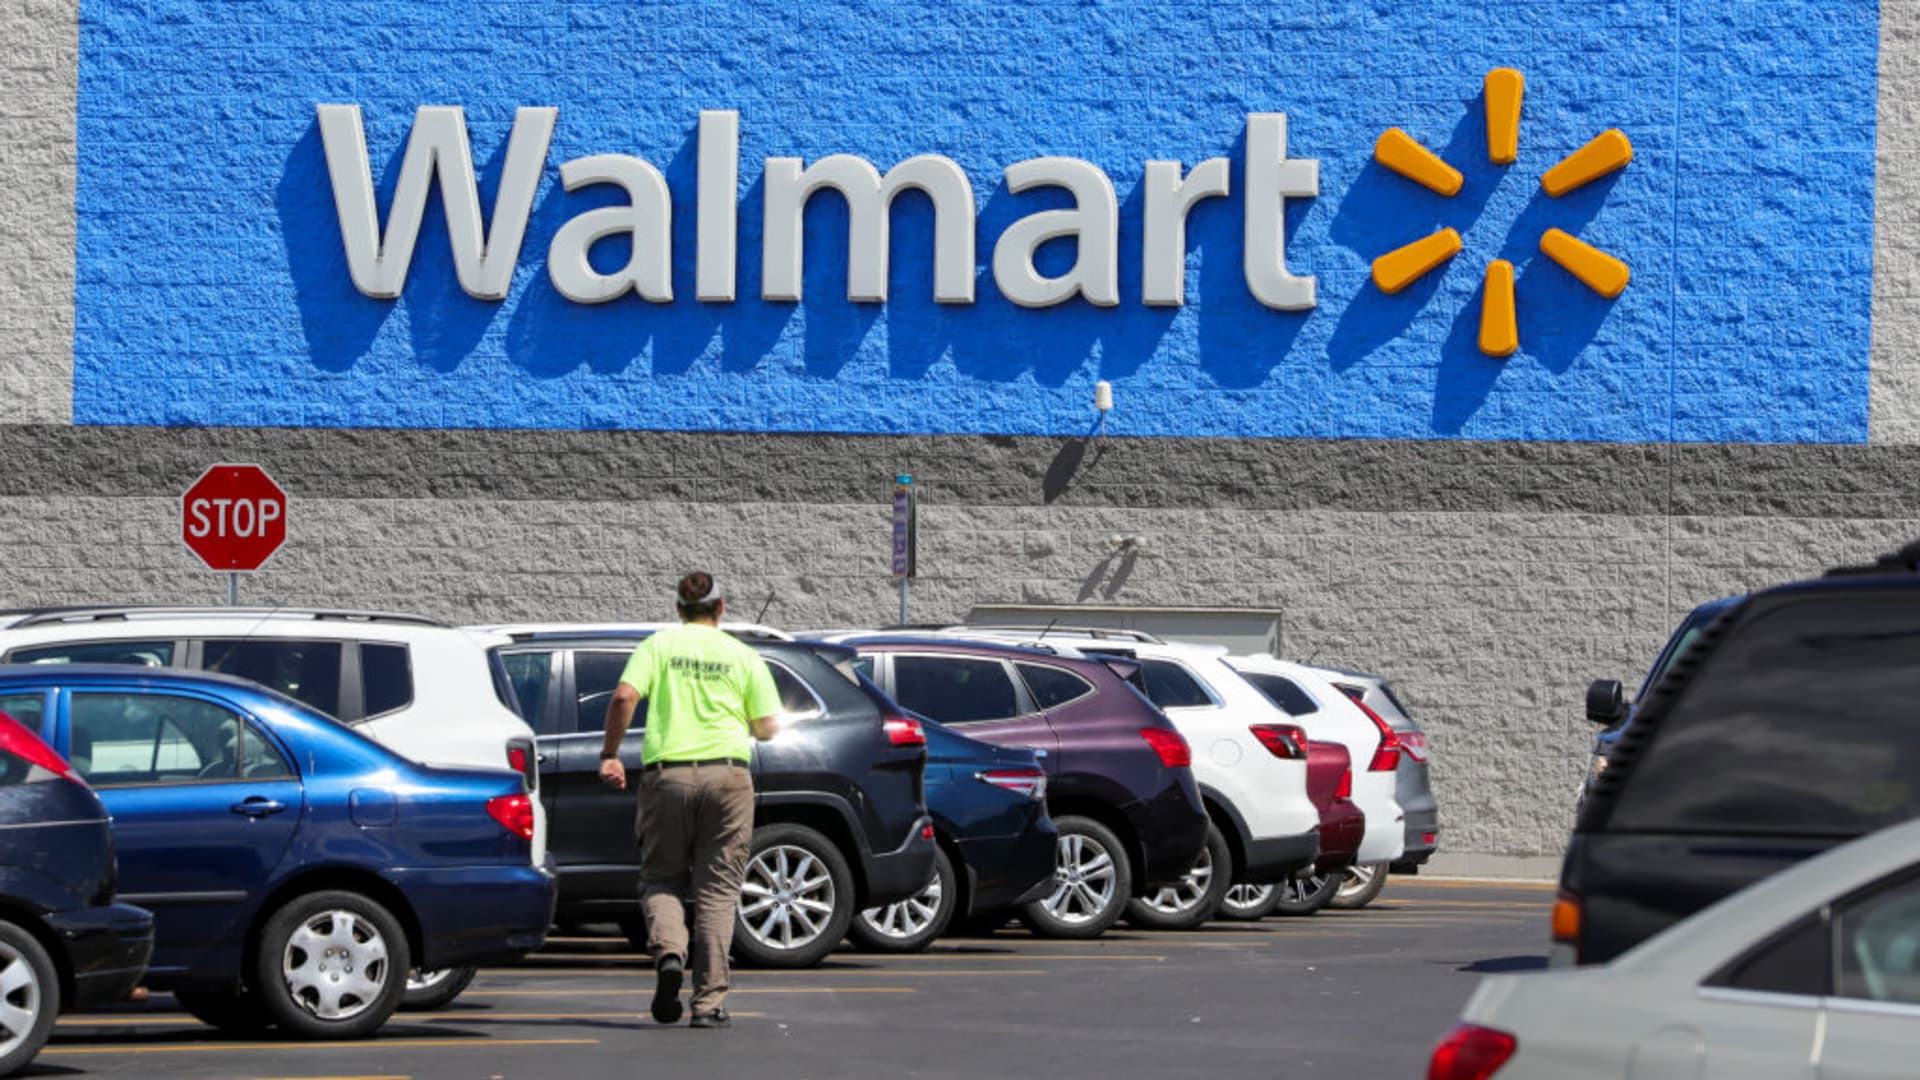 Rising thefts at Walmart could lead to price jumps, store closures, CEO says